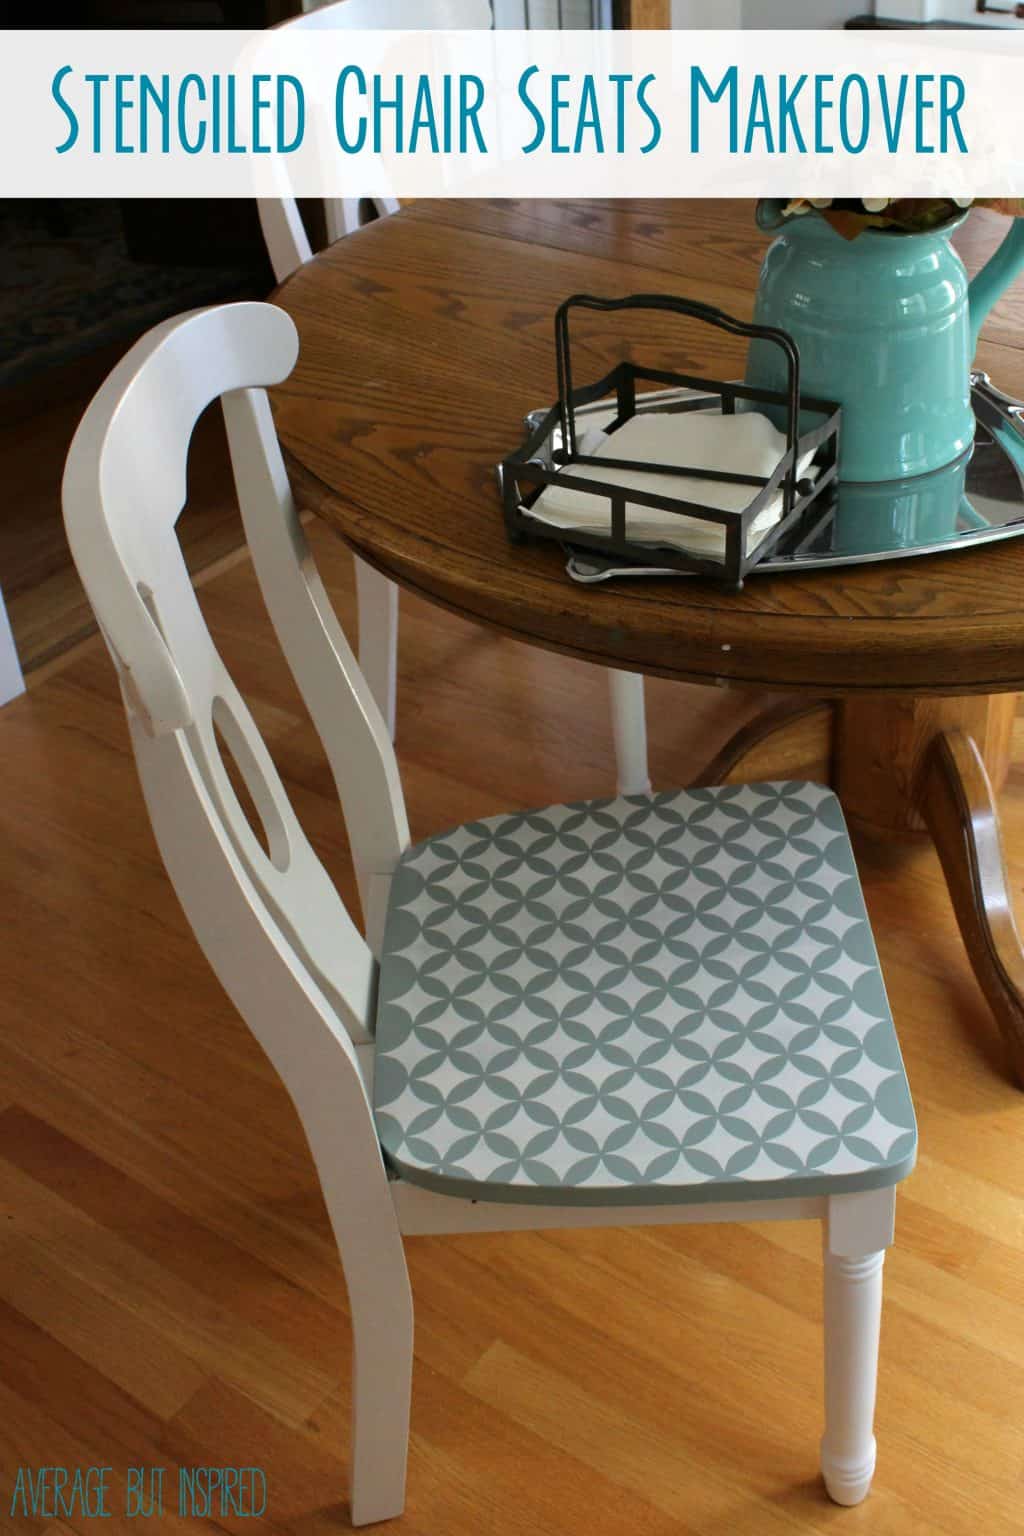 Stenciled Chair Seats A Thrifty And Fun Kitchen Chair Makeover